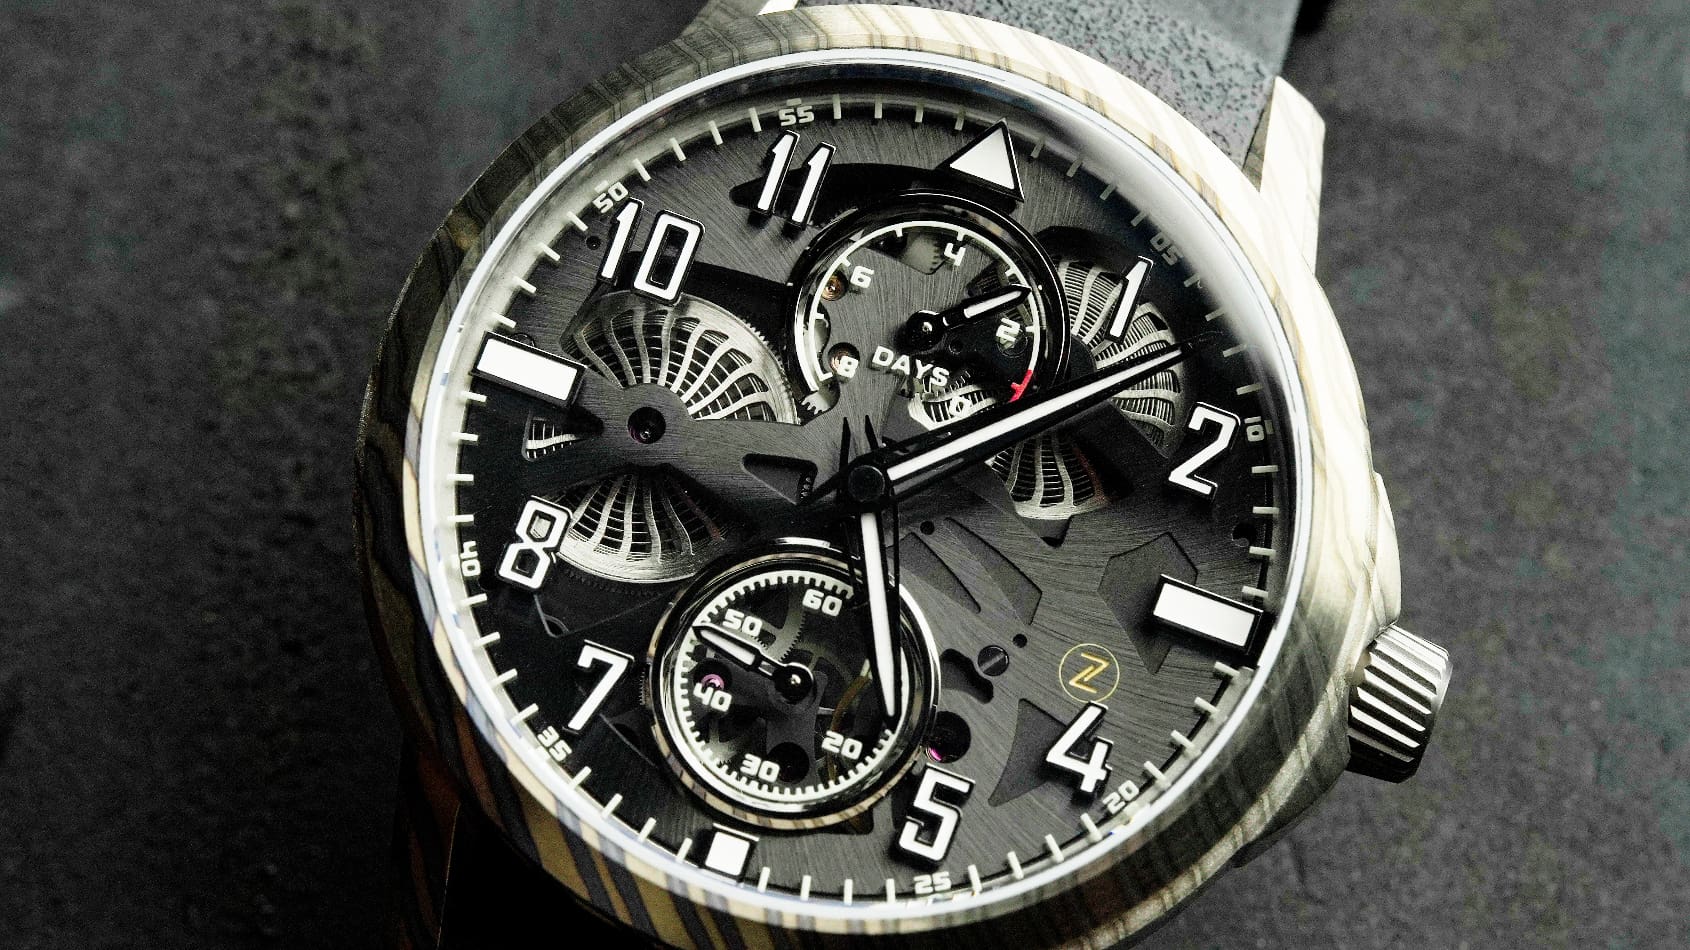 VIDEO: The Zelos Watches Mirage 2 marks the future of the pilot’s watch in titanium damascus